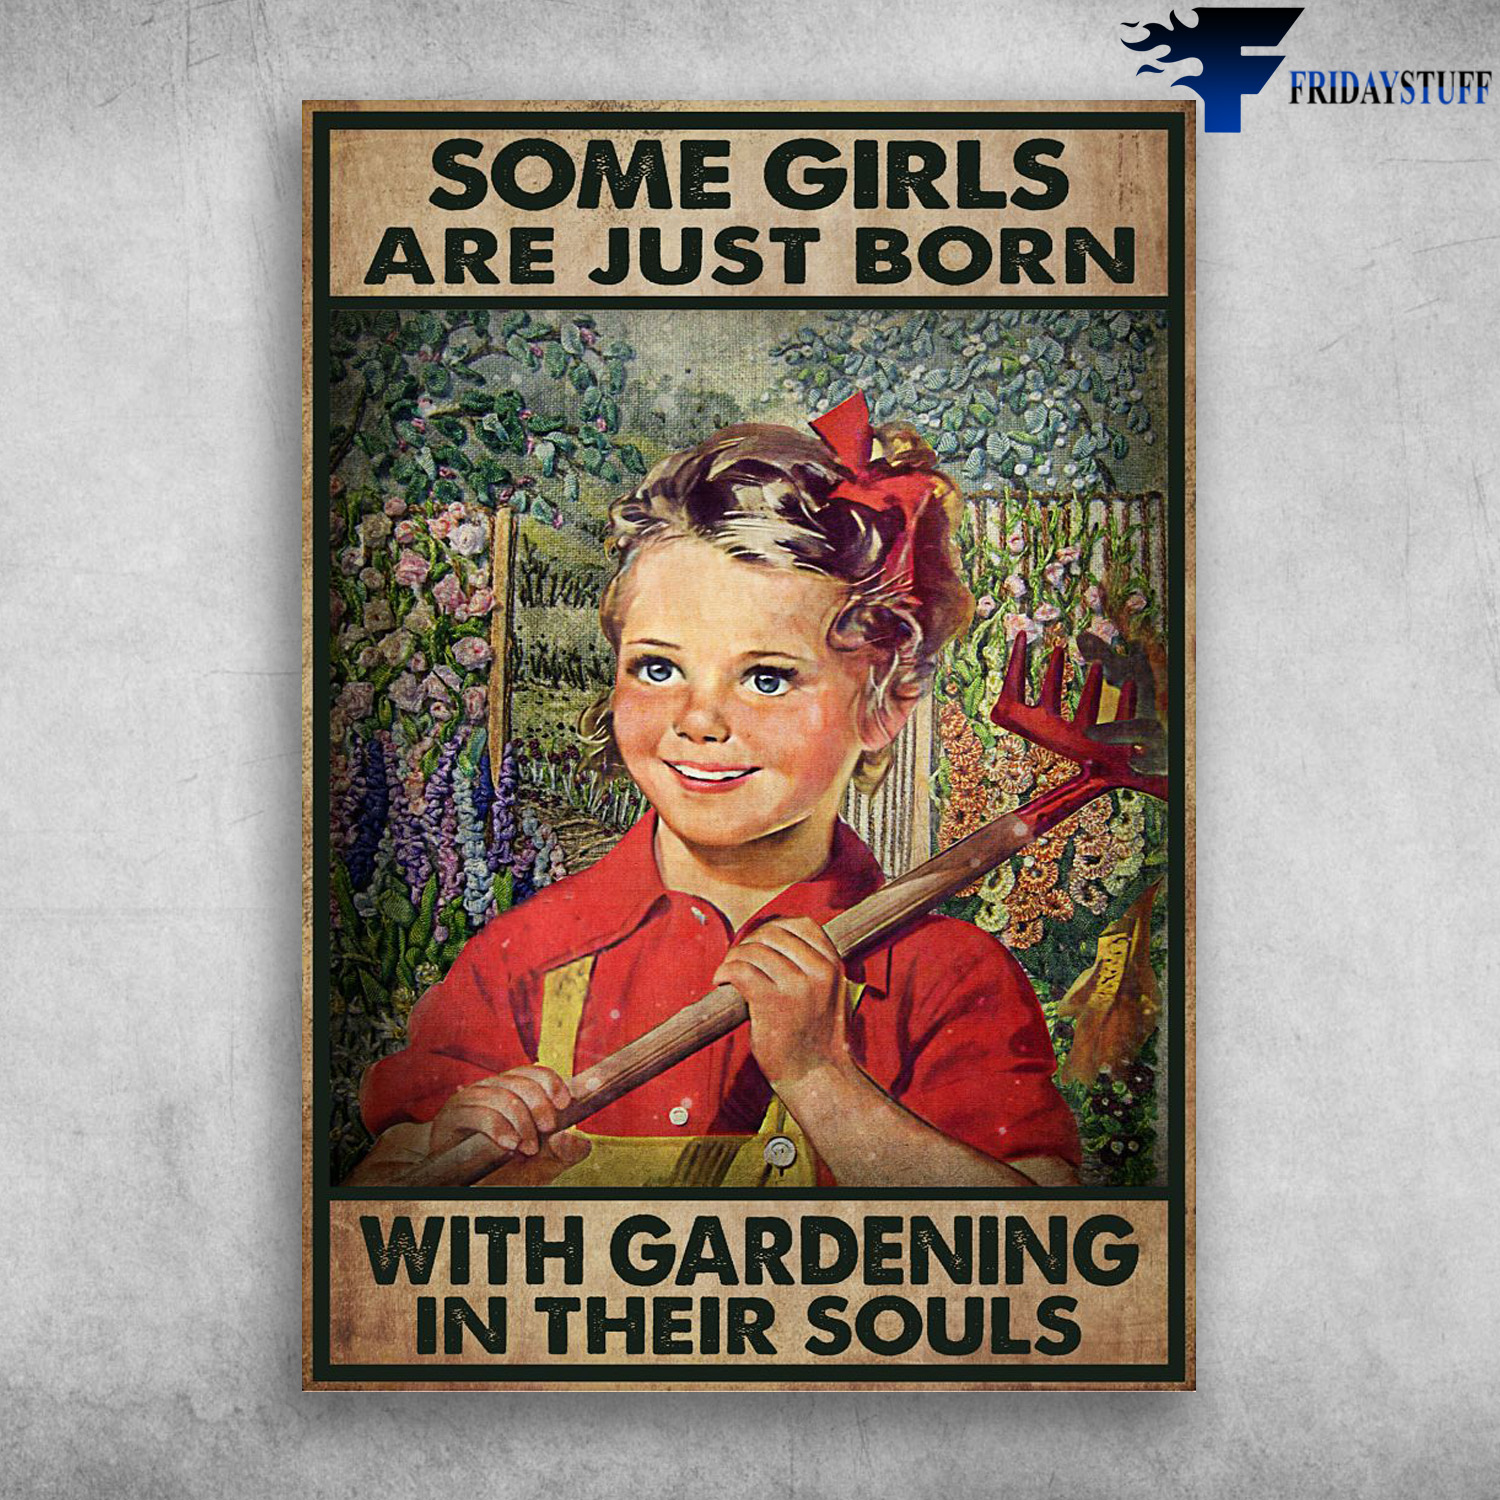 Little Girl Garden - Some Girls Are Just Born, With Gardening In Their Souls